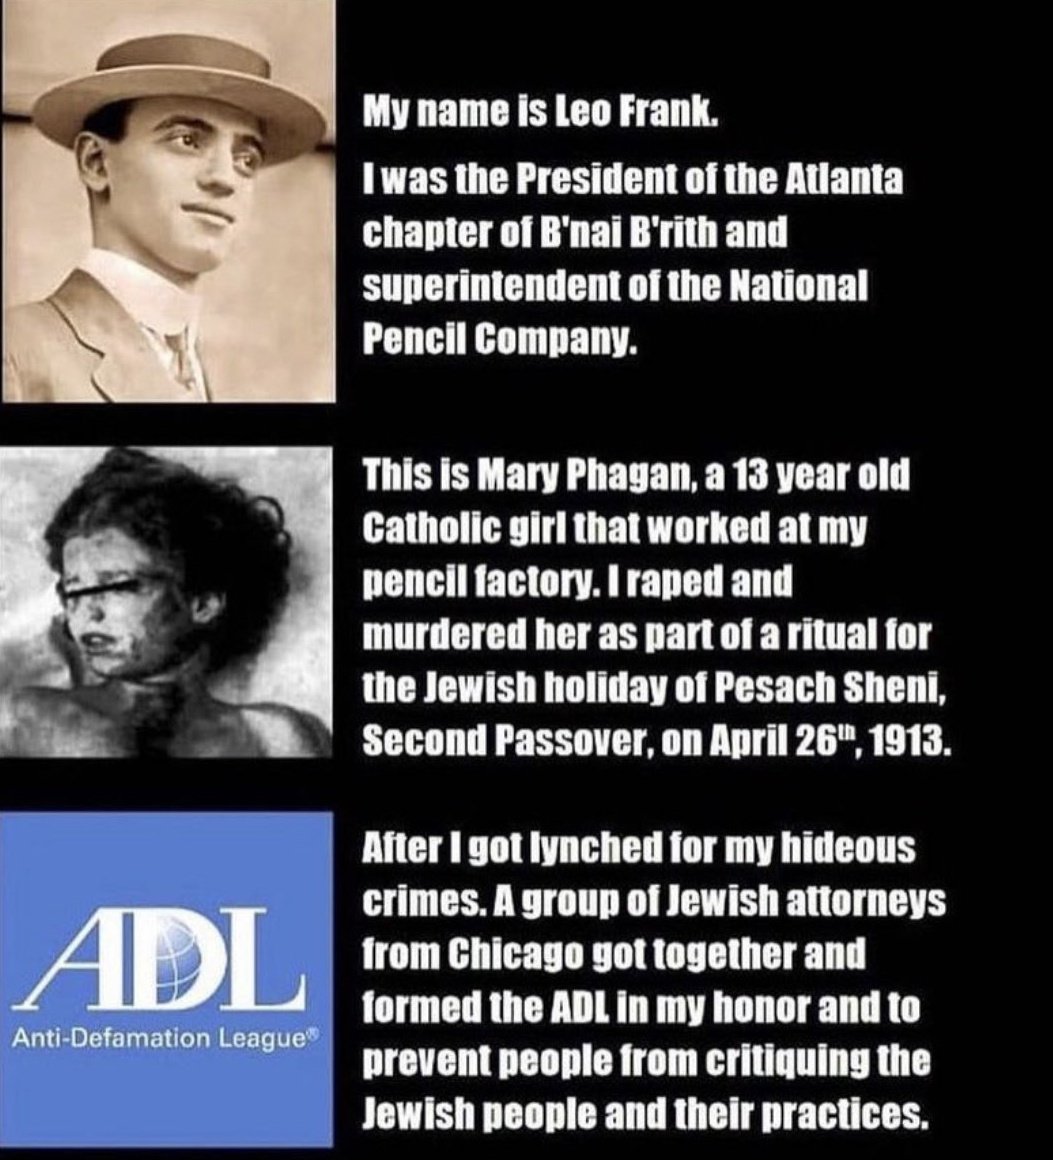 If you don't know why ADL was created, here's a short summary. If you trust them, you're an absolute moron